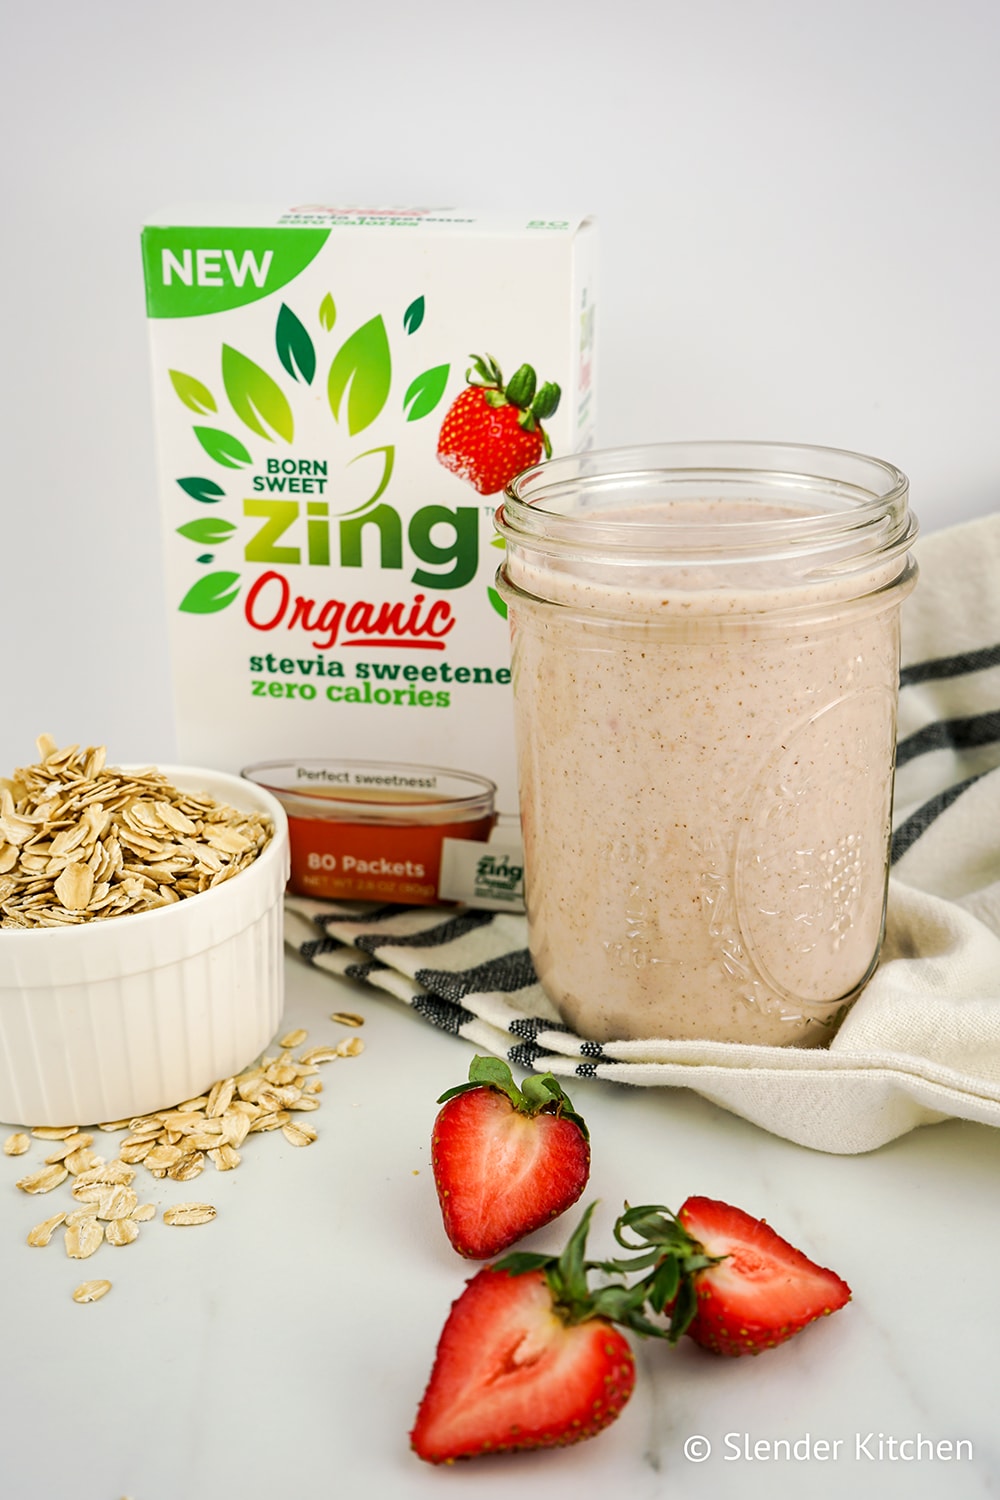 Strawberry Cheesecake Overnight Oat Smoothie